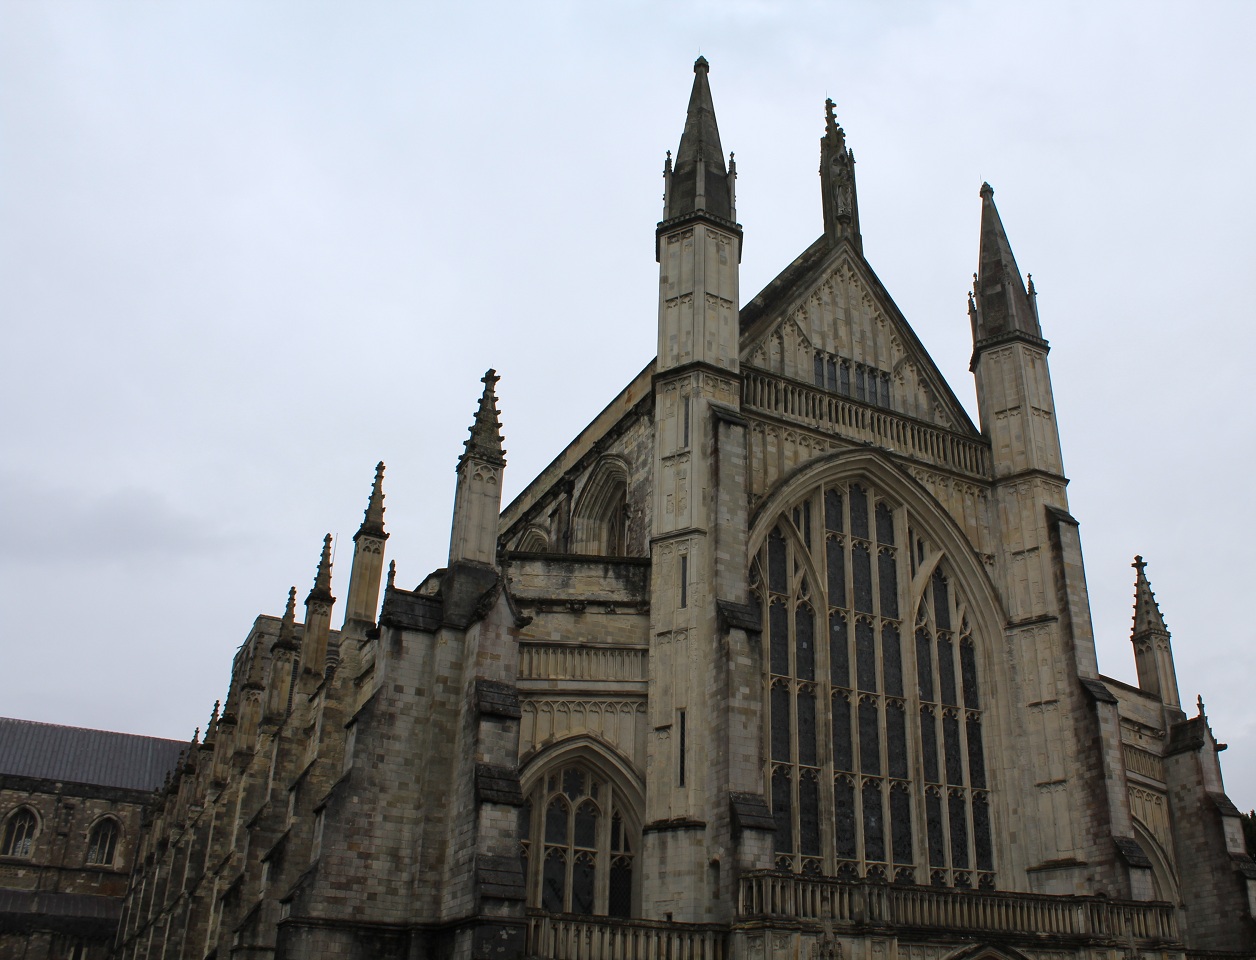 View of Winchester Cathedral from the front